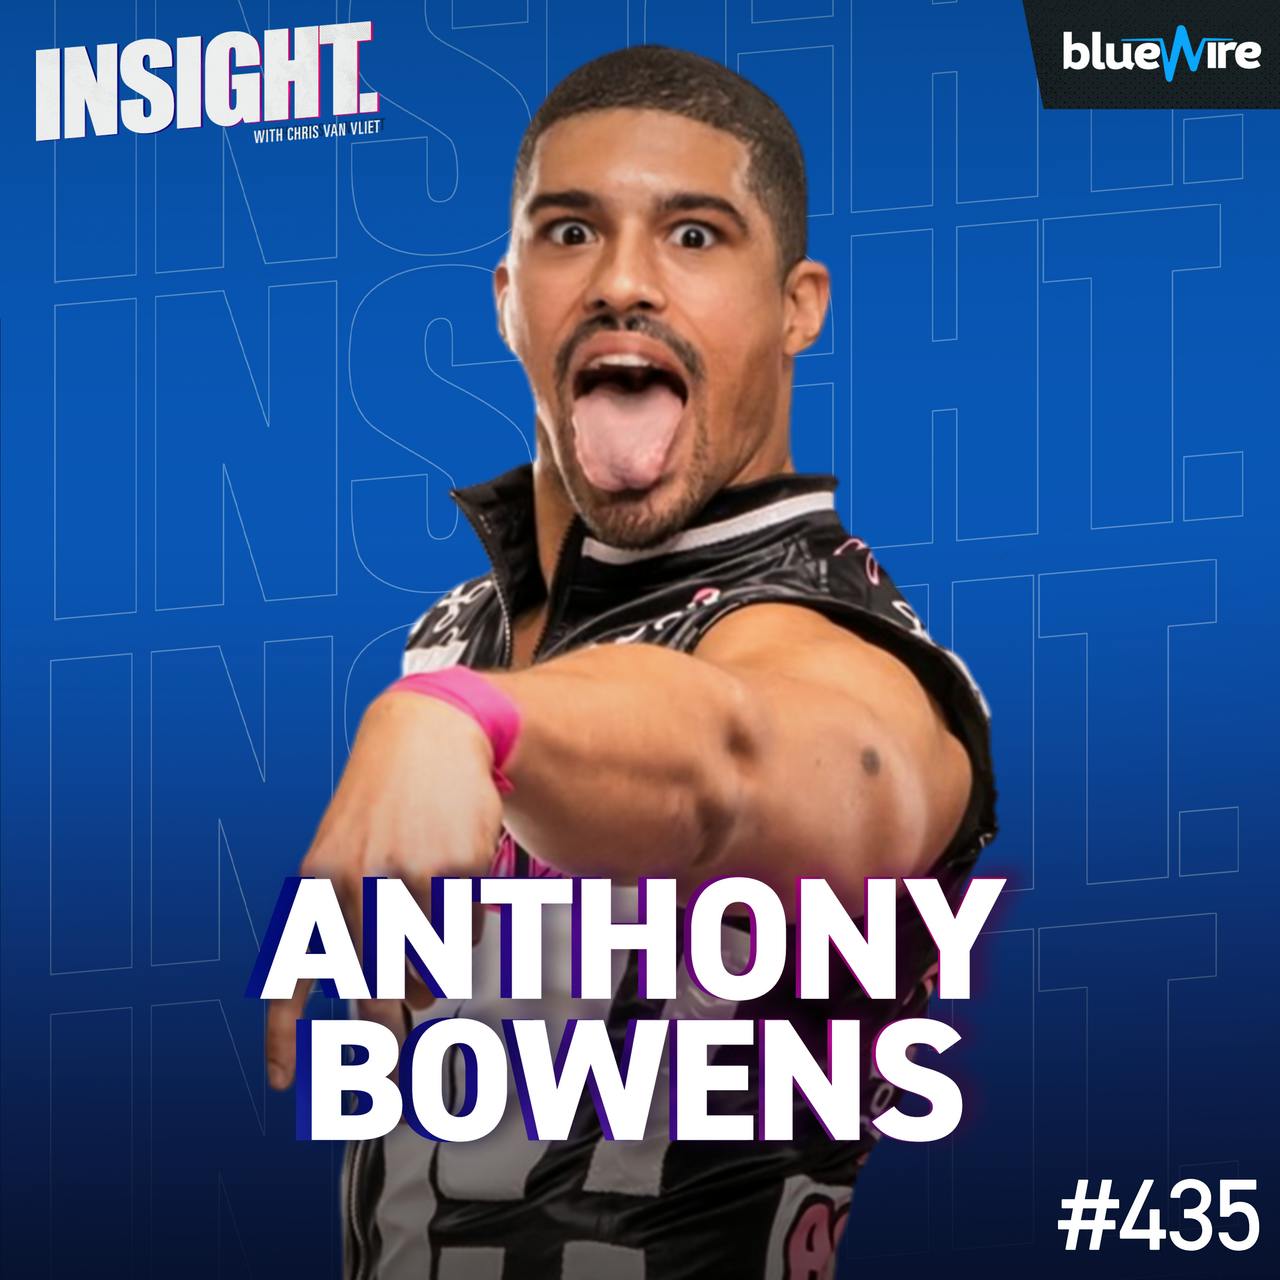 Anthony Bowens On The Acclaimed, Billy Gunn, "Scissor Me" Catchphrase, Max Caster's Rapping